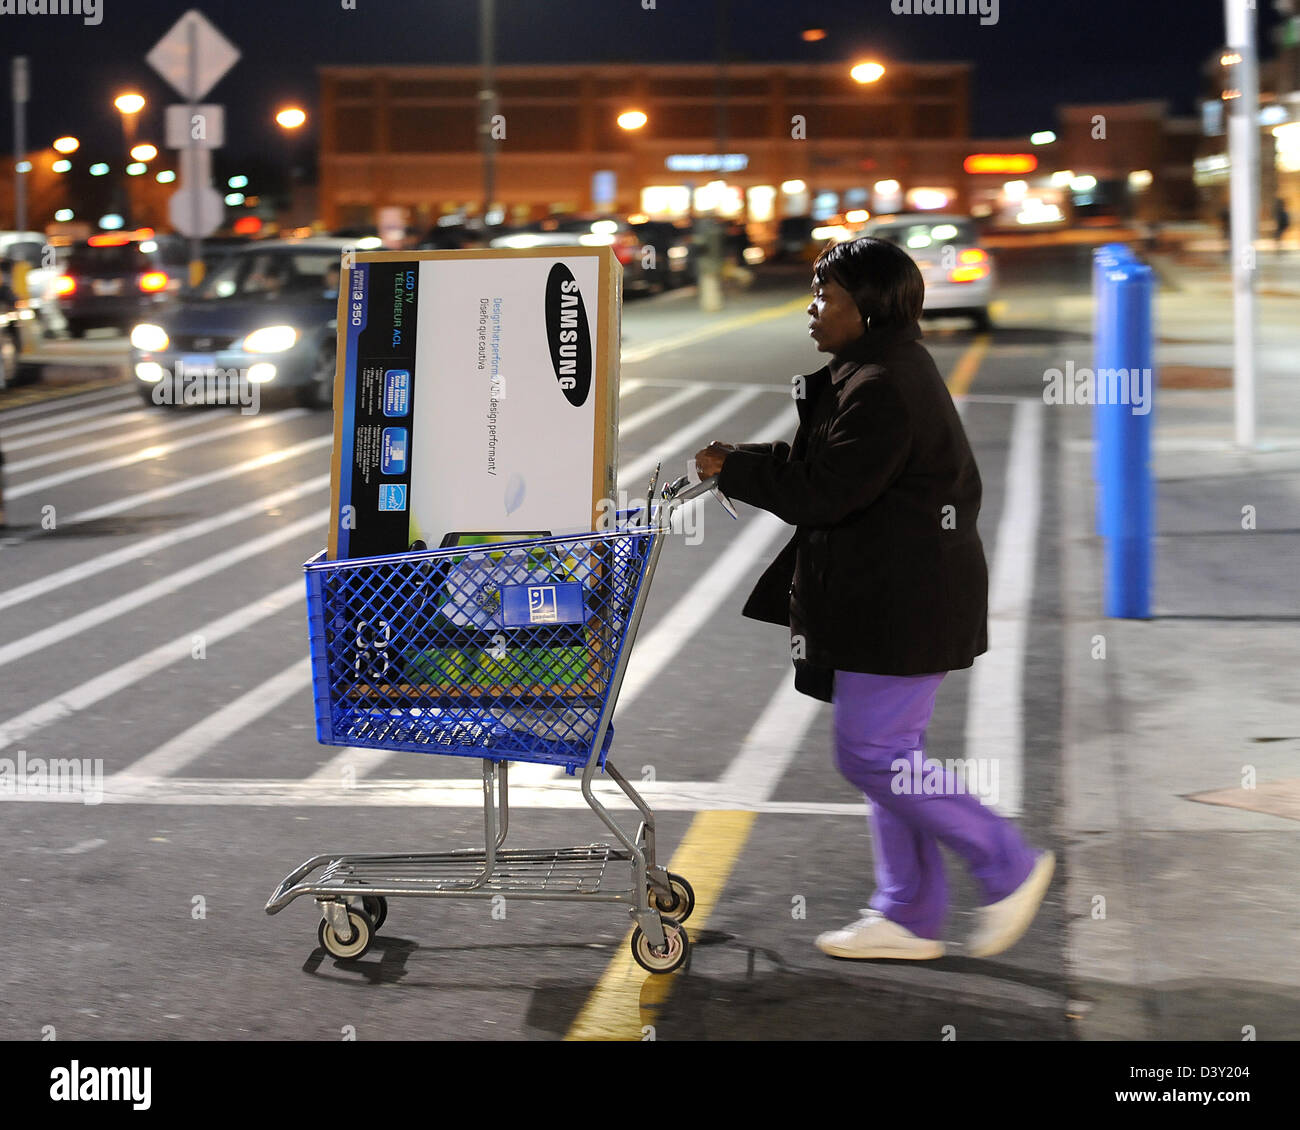 Last minute Christmas shopping, a woman leaves a Wal-Mart store on Christmas eve in CT USA Stock Photo